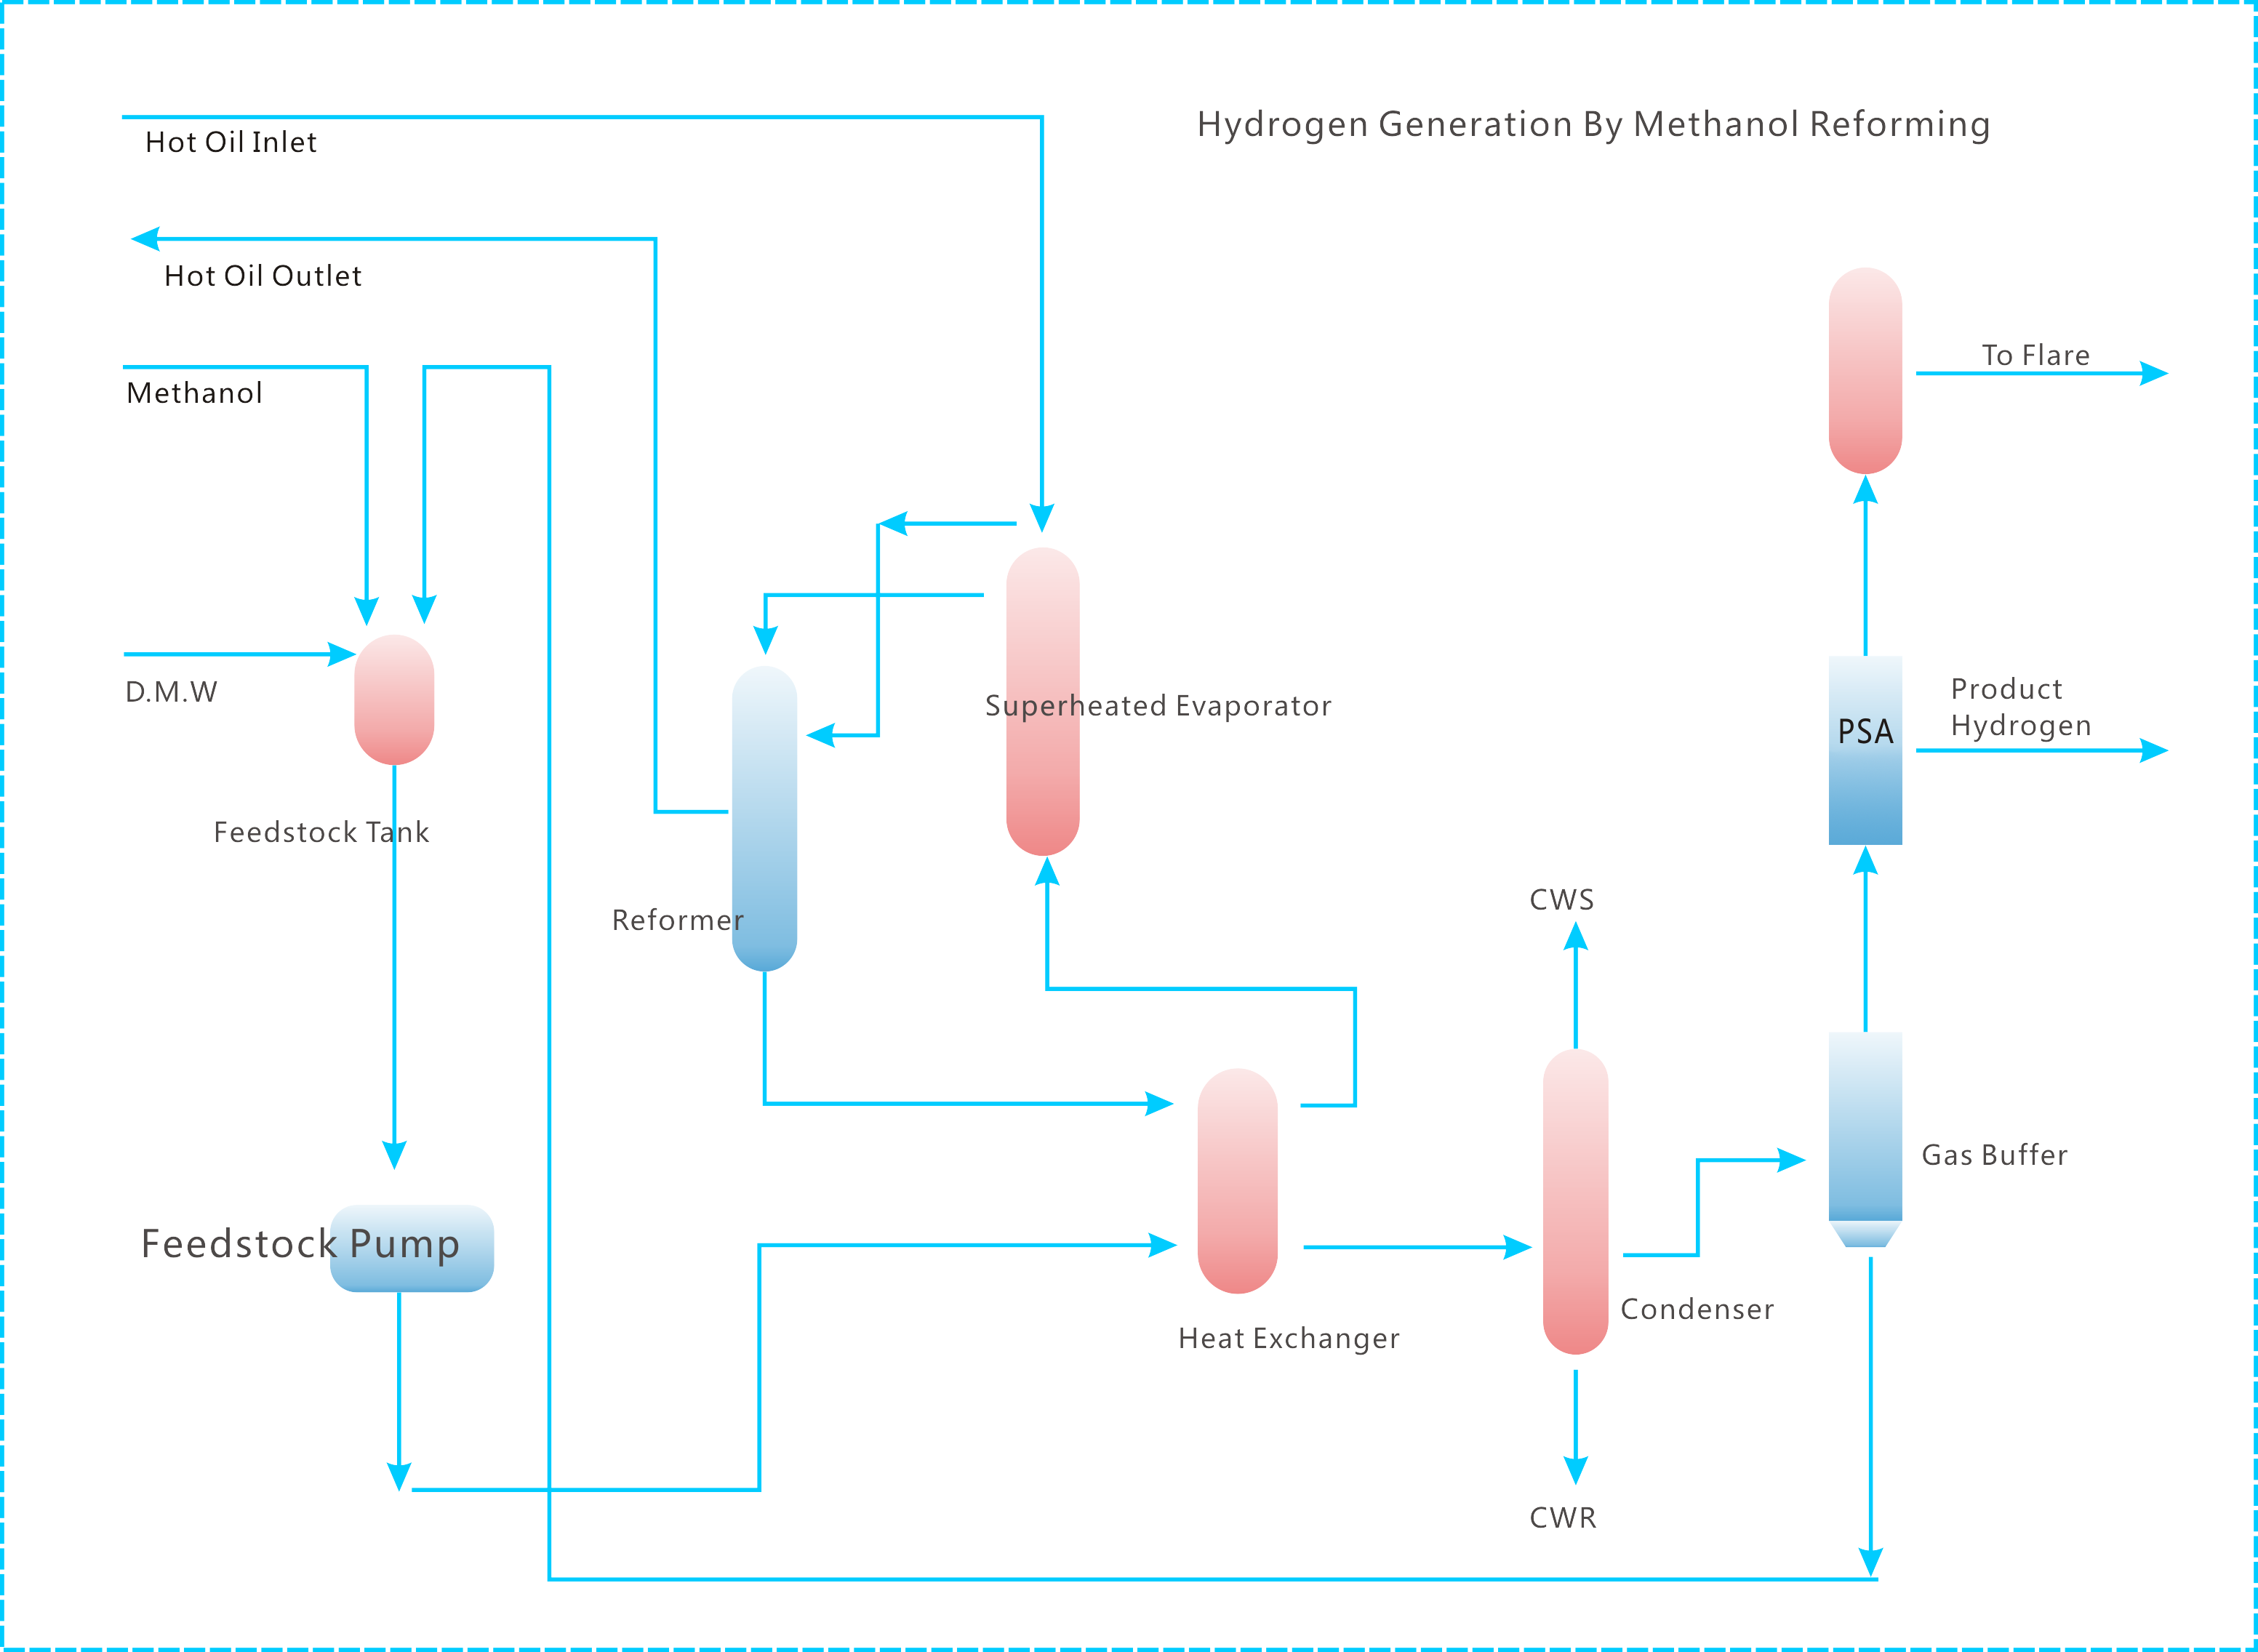 Hydrogen Production by Methanol Reforming